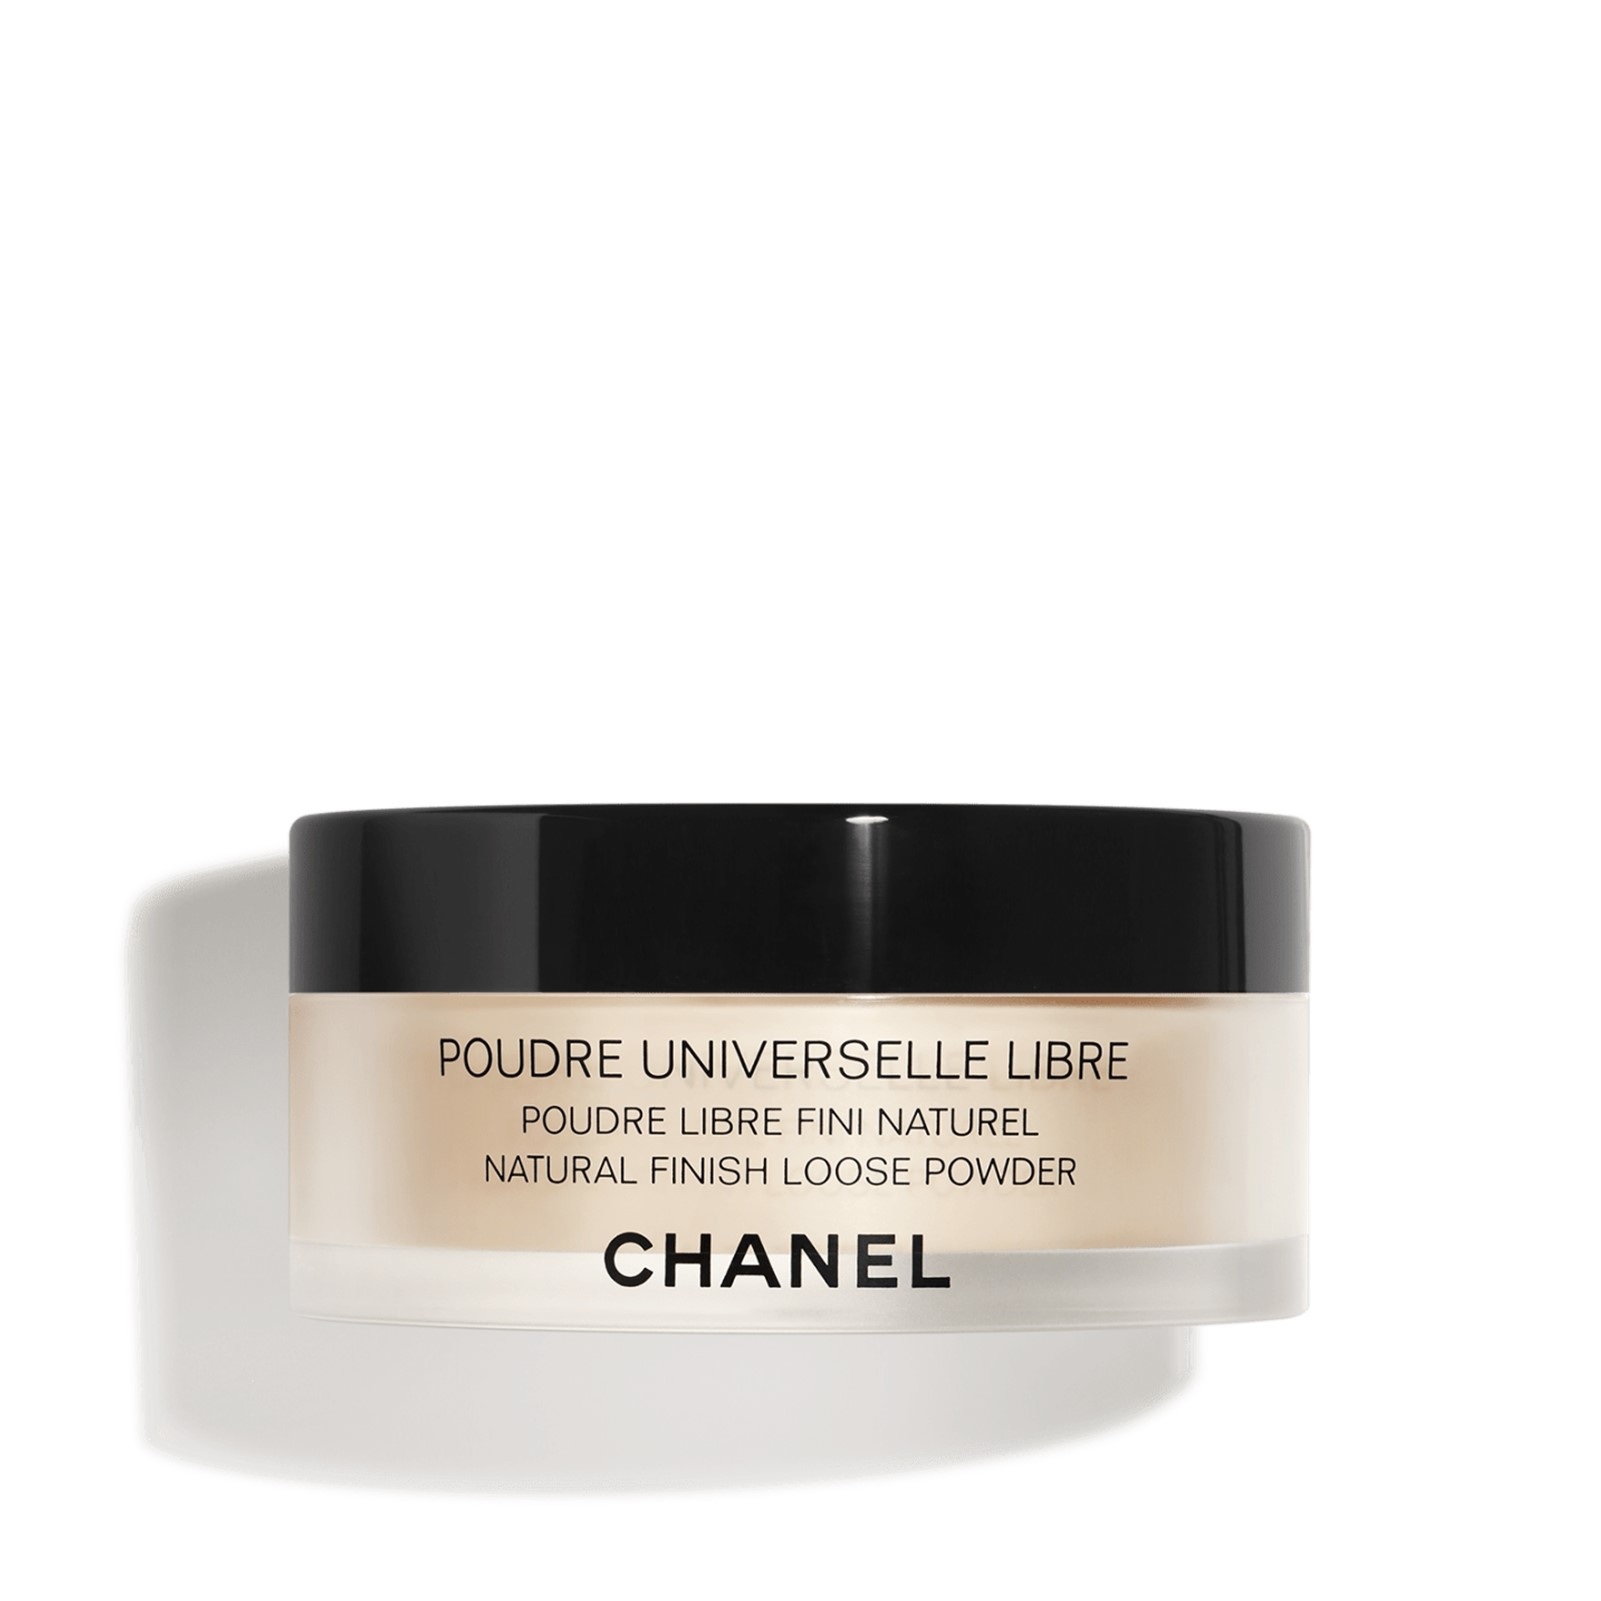 Poudre Universelle Libre  Natural Finish Loose Powder in 30